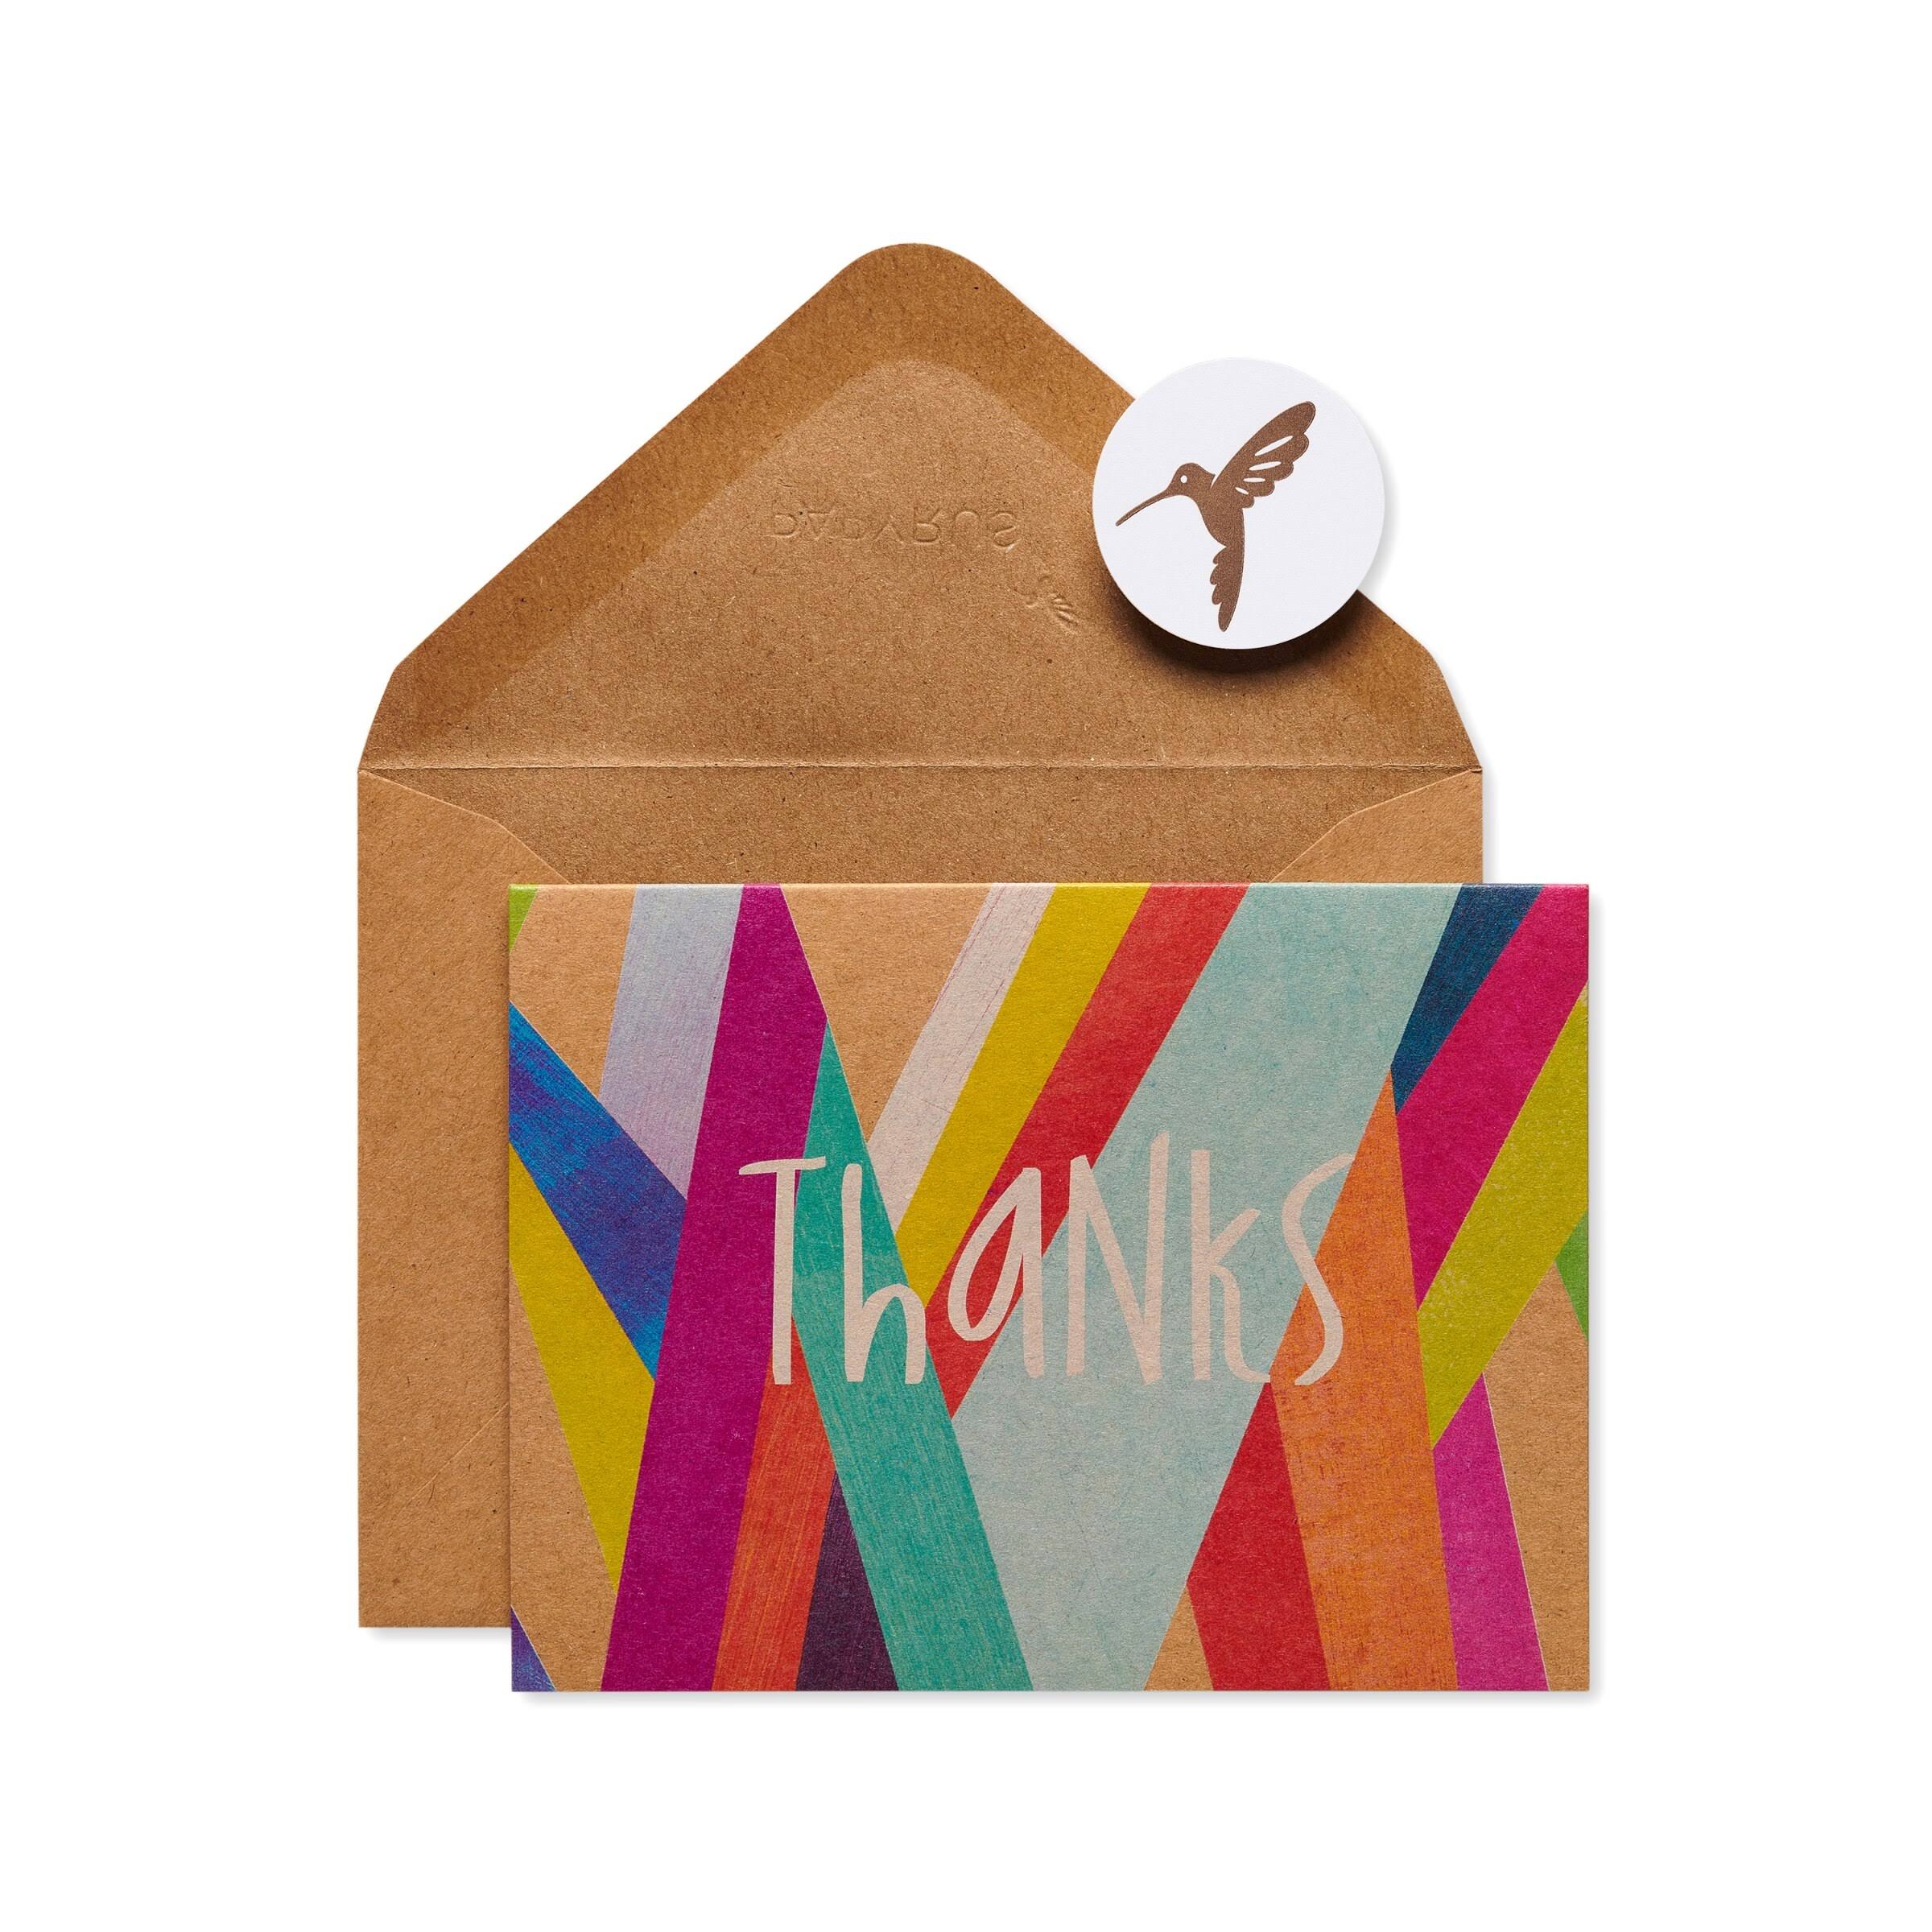 Papyrus Thank You Cards with Envelopes, Branches (20-Count)